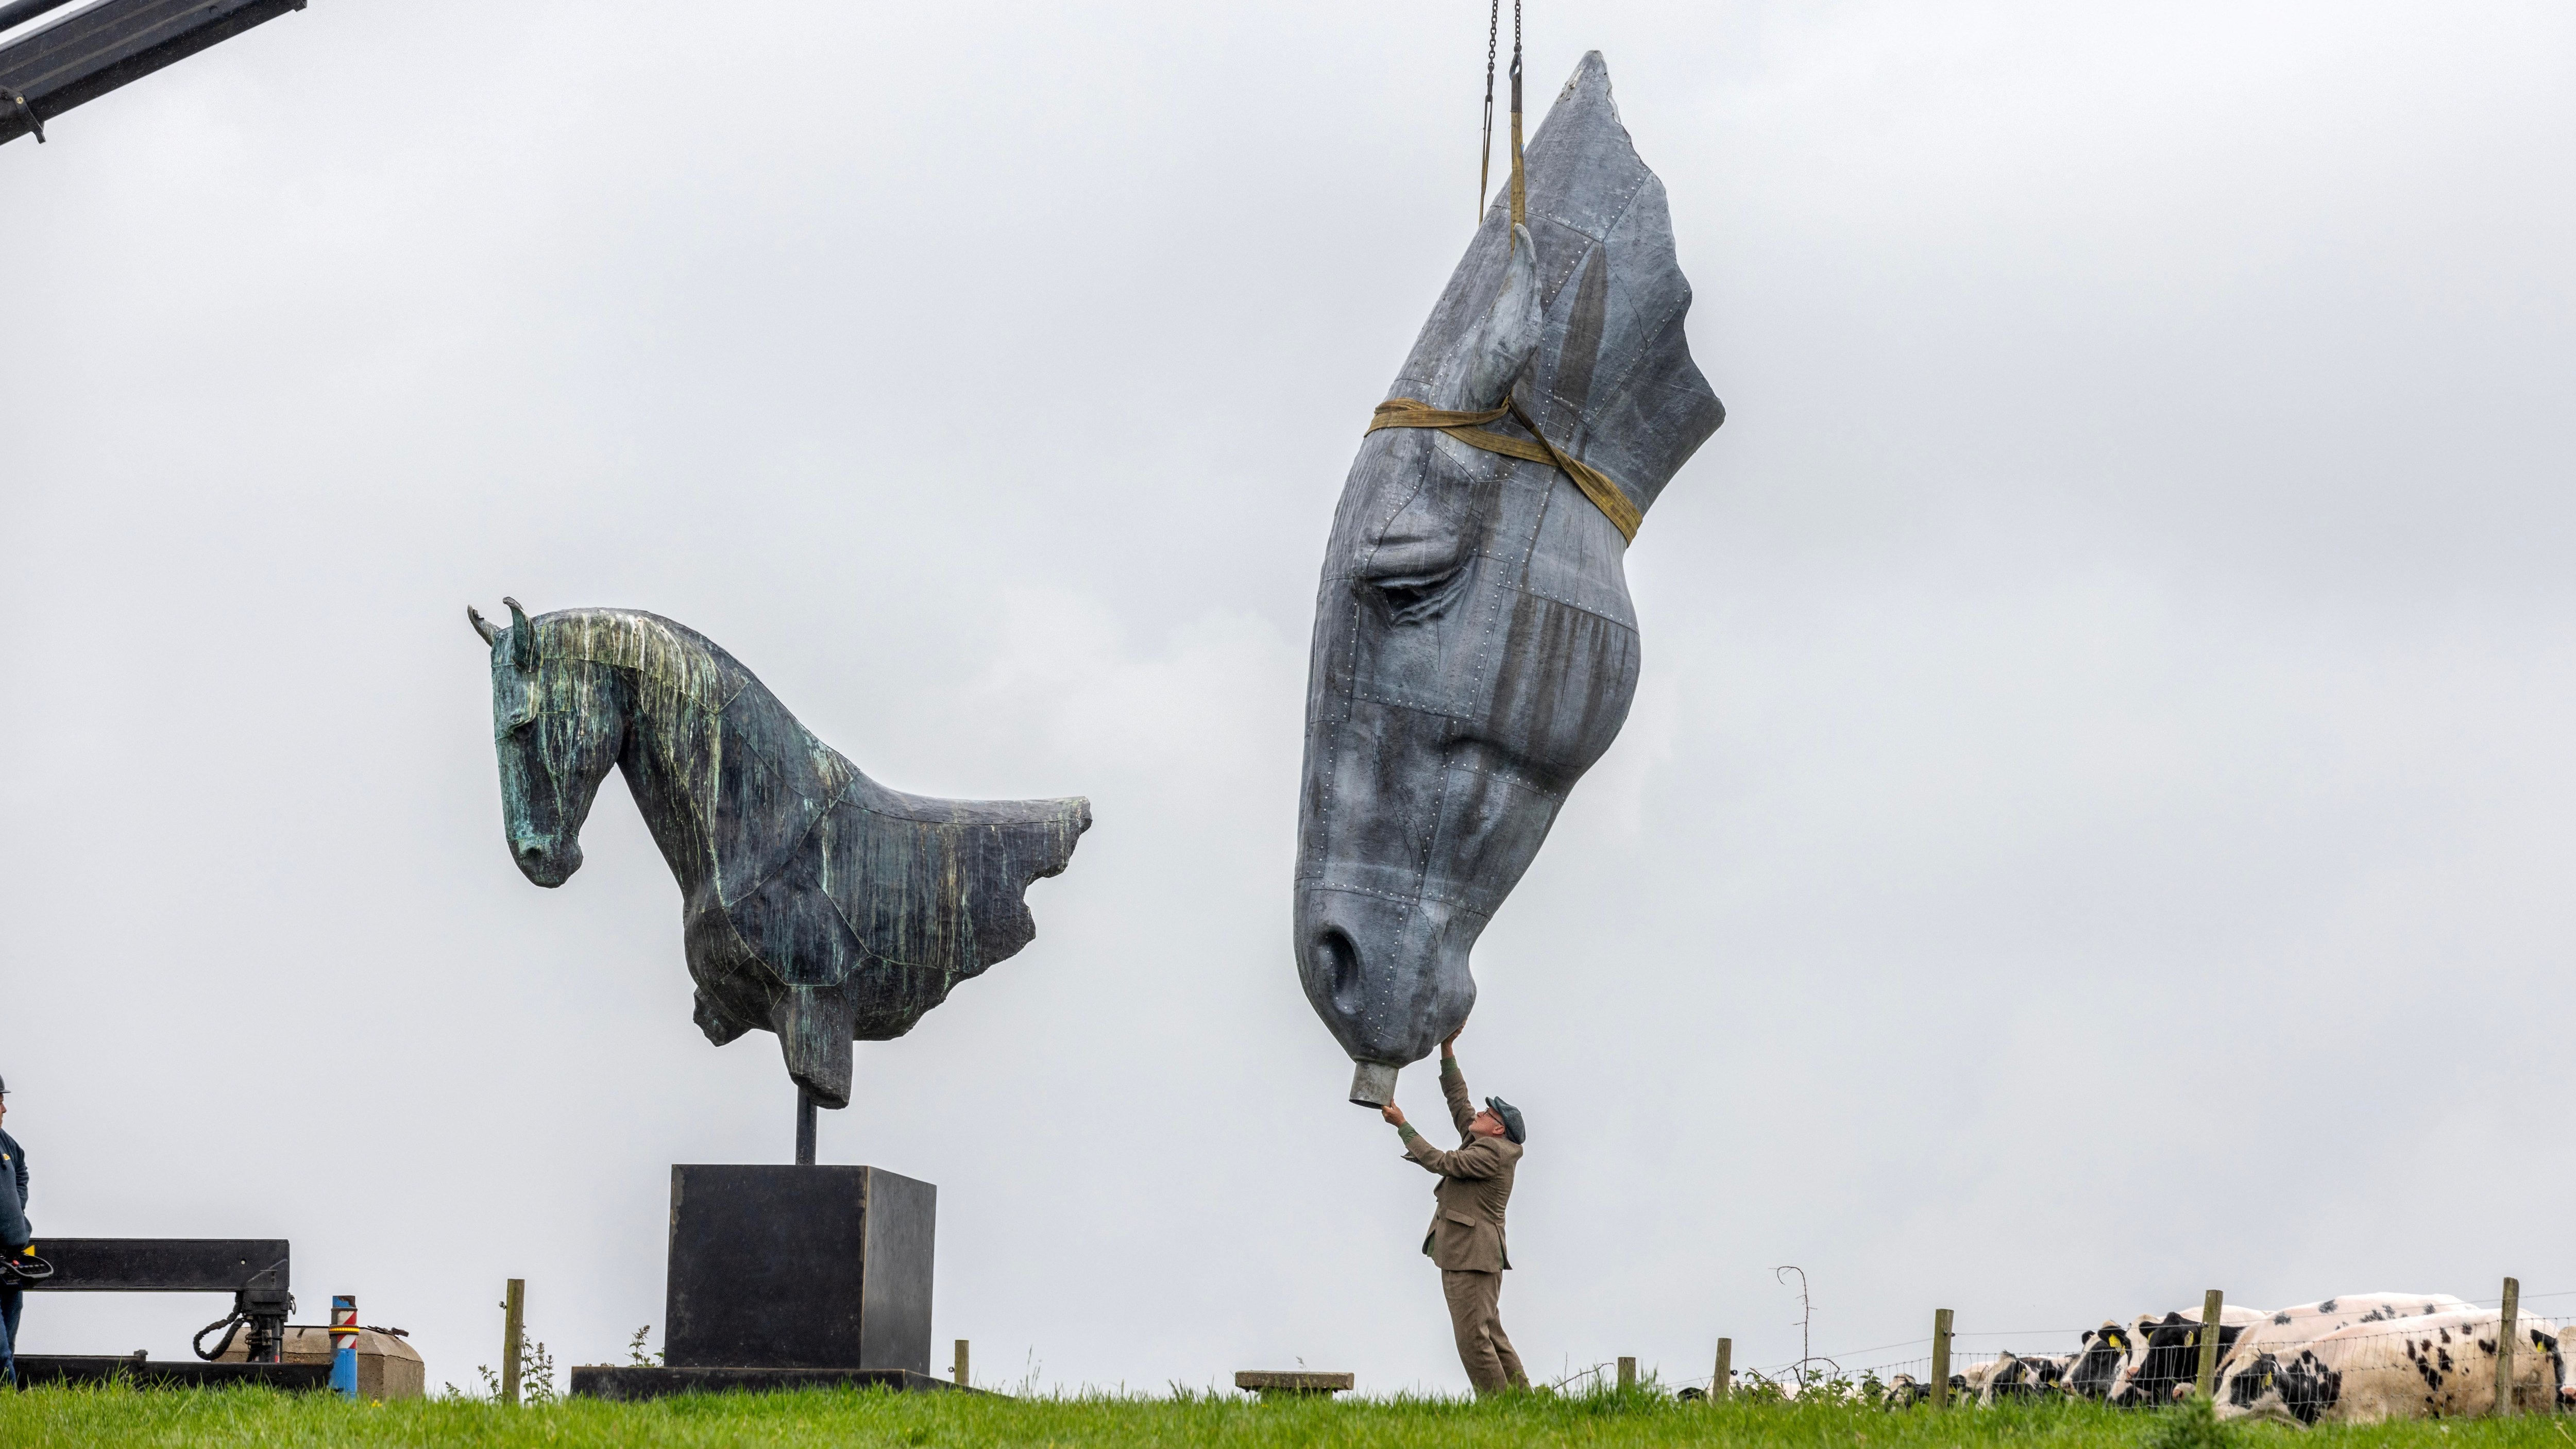 The sculptor Nic Fiddian-Green guides his one-and-a-half ton lead sculpture of a horse head onto its plinth on a hill near Oxshott in Surrey. The sculpture, entitled Serenity, will replace Fiddian-Green’s older sculpture, Roman Horse, and will be able to be seen by motorists on the A3